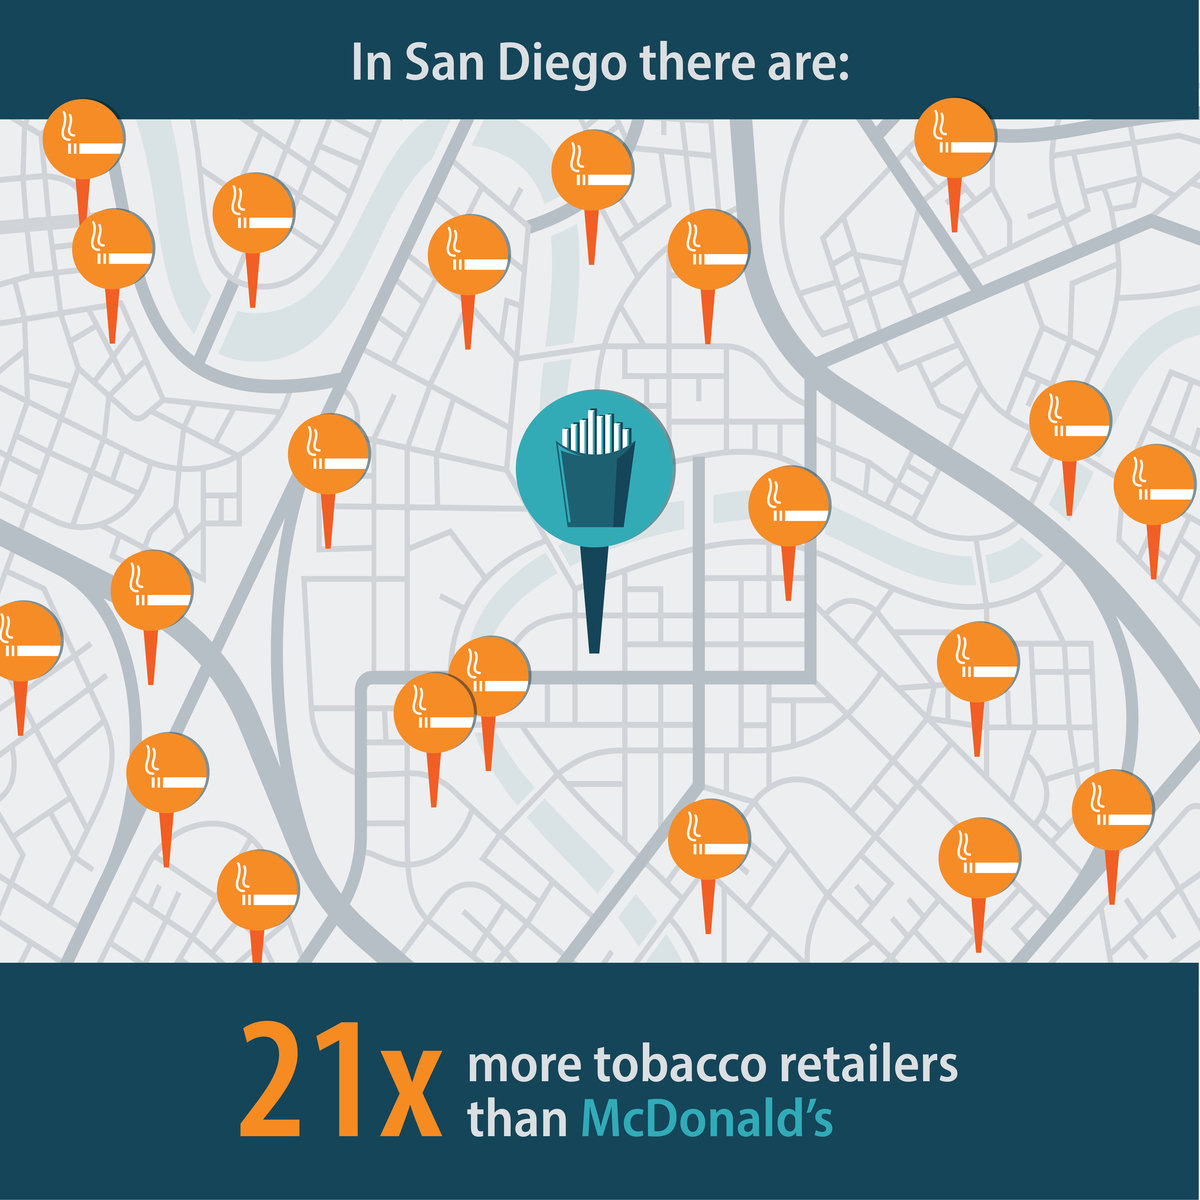 In San Diego there are: 21 times more tobacco retailers than McDonald's